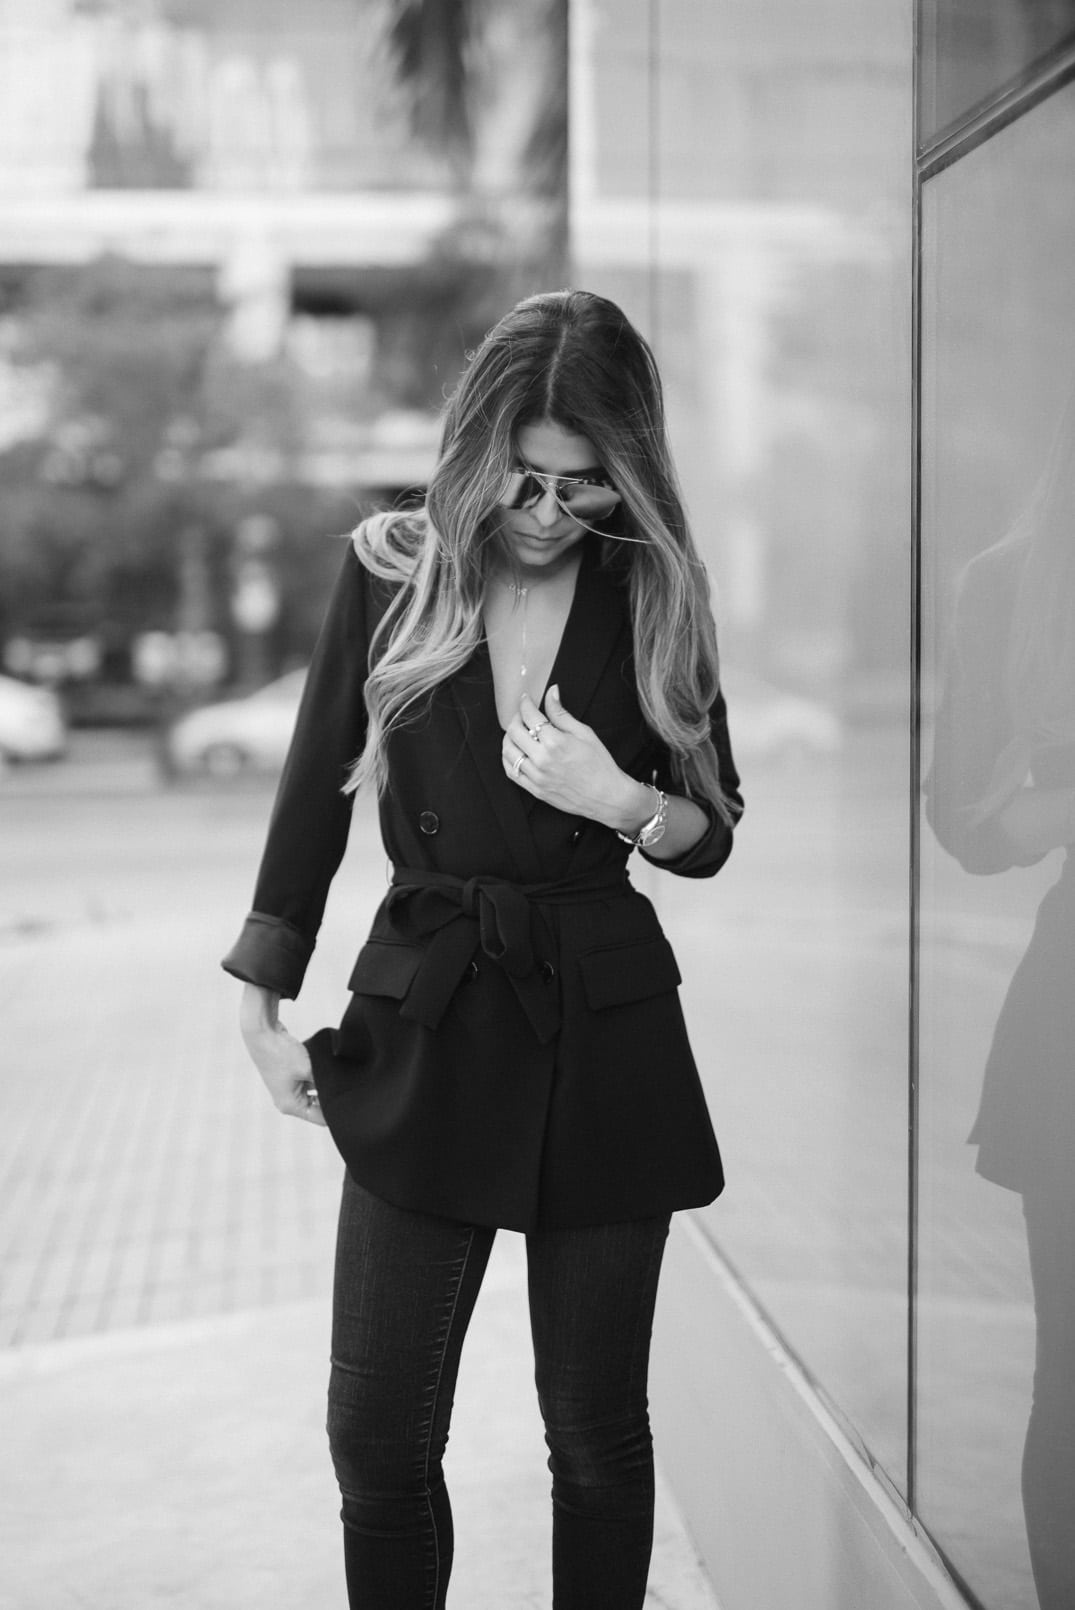 Pam Hetlinger, The Girl From Panama wearing a Zara Belted Blazer, Joe's Jeans, whistles pointed toe slide mules, and Dior Abstract Sunglasses.